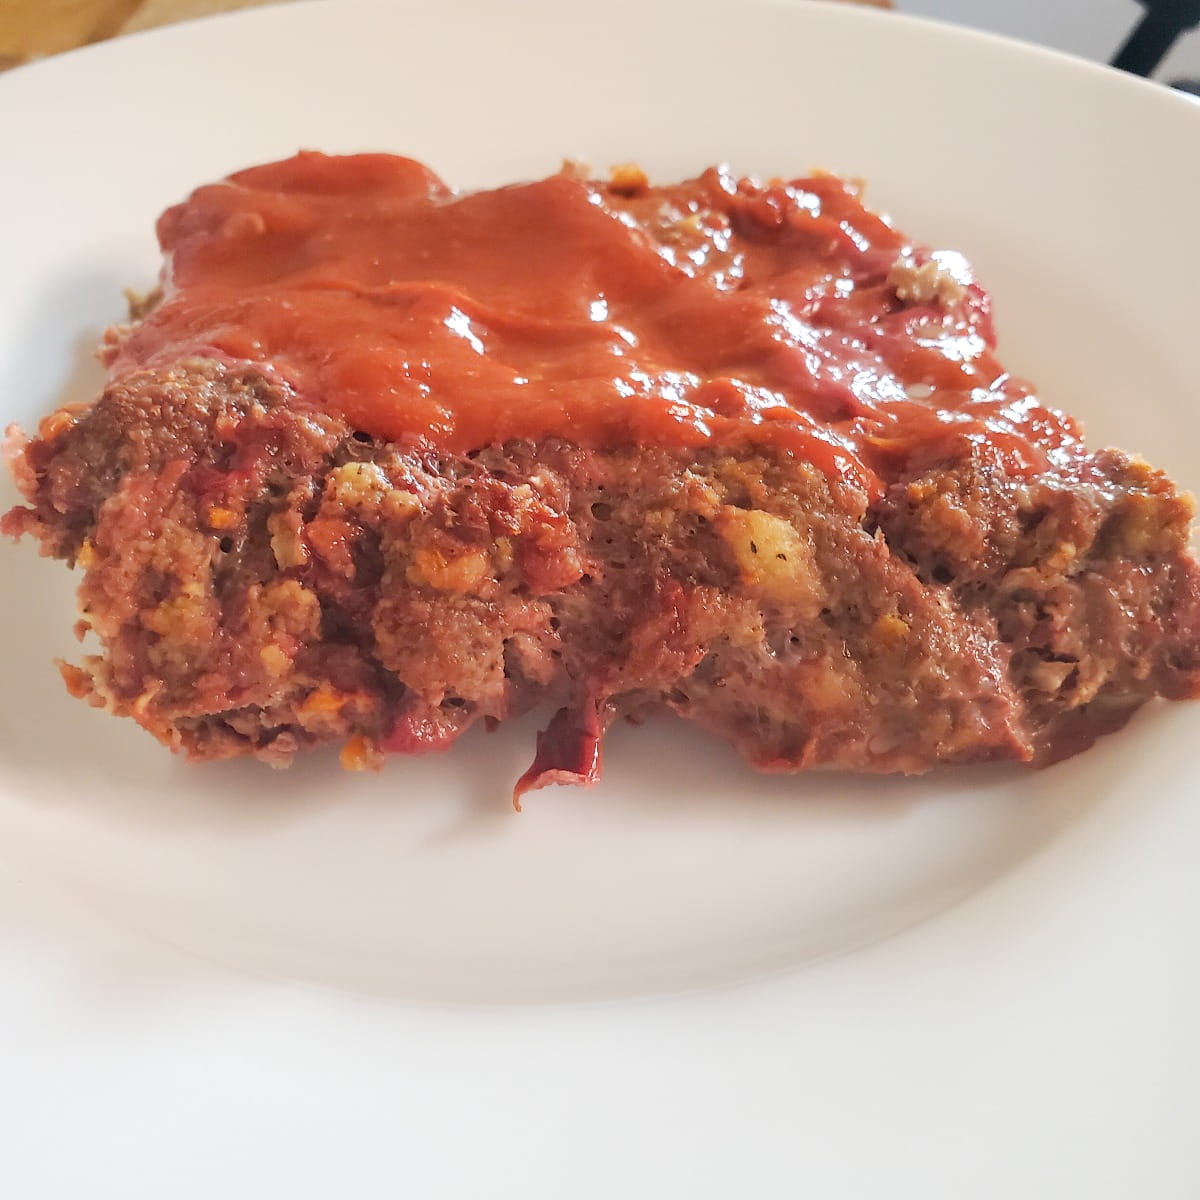 This is Our Favorite Meatloaf Recipe